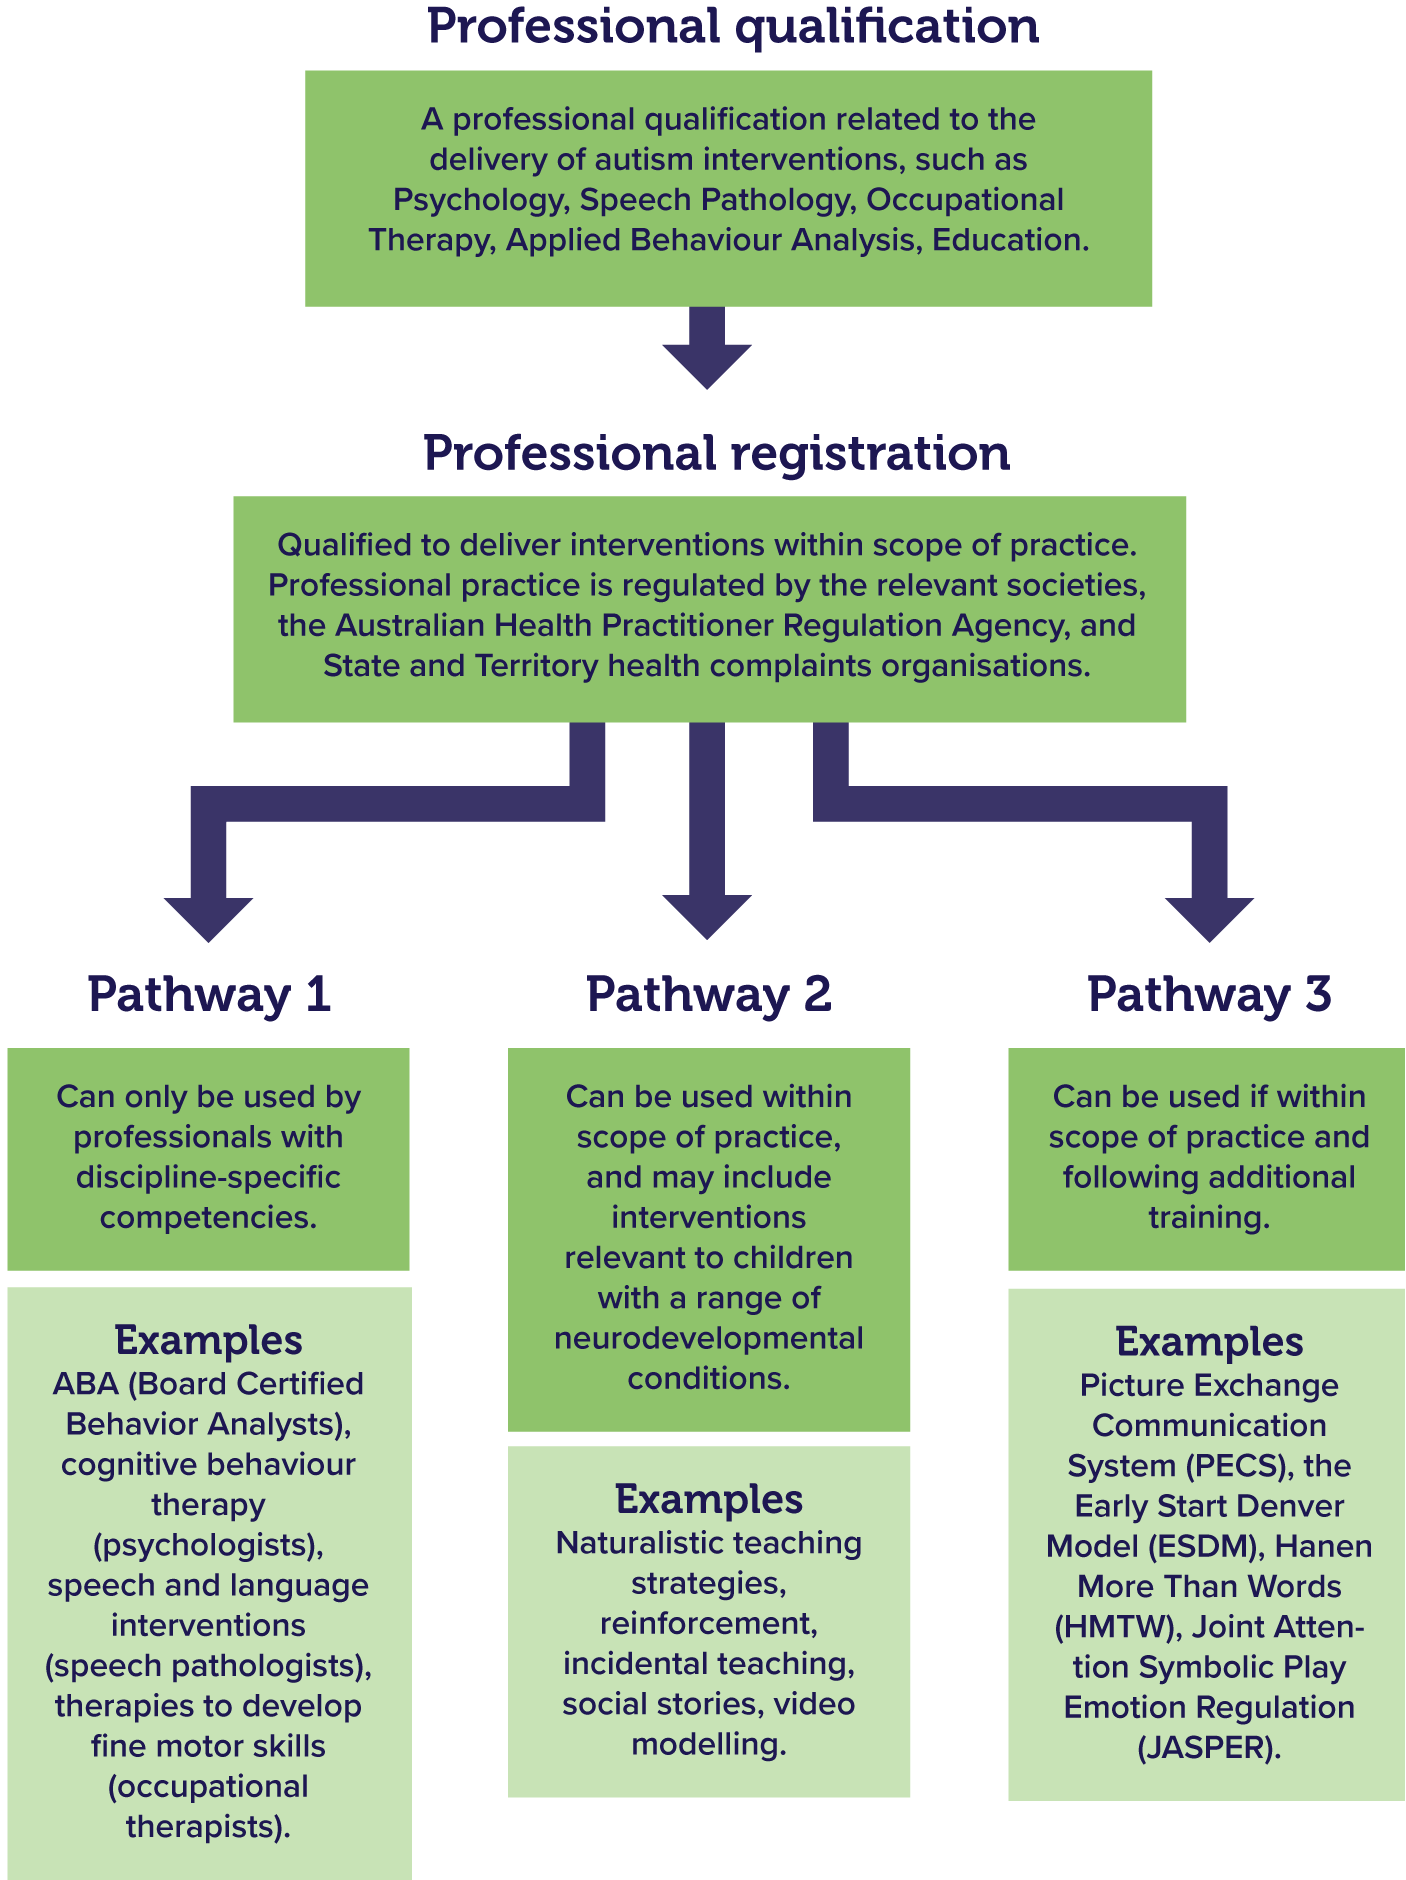 The start of the pathway is a professional qualification related to the delivery of autism interventions, such as Psychology, Speech Pathology, Occupational Therapy, Applied Behaviour Analysis, Education.     This leads to professional registration, qualifying registrants to deliver interventions within scope of practice. Professional practice is regulated by the relevant societies, the Australian Health Practitioner Regulation Agency, and State and Territory health complaints organisations.    From professsional registration there are 3 pathways for interventions.    Pathway 1 can only be used by professionals with discipline-specific competencies. Examples include ABA (Board Certified Behavior Analysts), cognitive behaviour therapy (psychologists), speech and language interventions (speech pathologists), therapies to develop fine motor skills (occupational therapists).     Pathway 2 can be used within scope of practice, and may include interventions relevant to children with a range of neurodevelopmental conditions. Examples include naturalistic teaching strategies, reinforcement, incidental teaching, social stories, video modelling.    Pathway 3 can be used if within scope of practice and following additional training. Examples include Picture Exchange Communication System (PECS), the Early Start Denver Model (ESDM), Hanen More Than Words (HMTW), Joint Attention Symbolic Play Emotion Regulation (JASPER). 